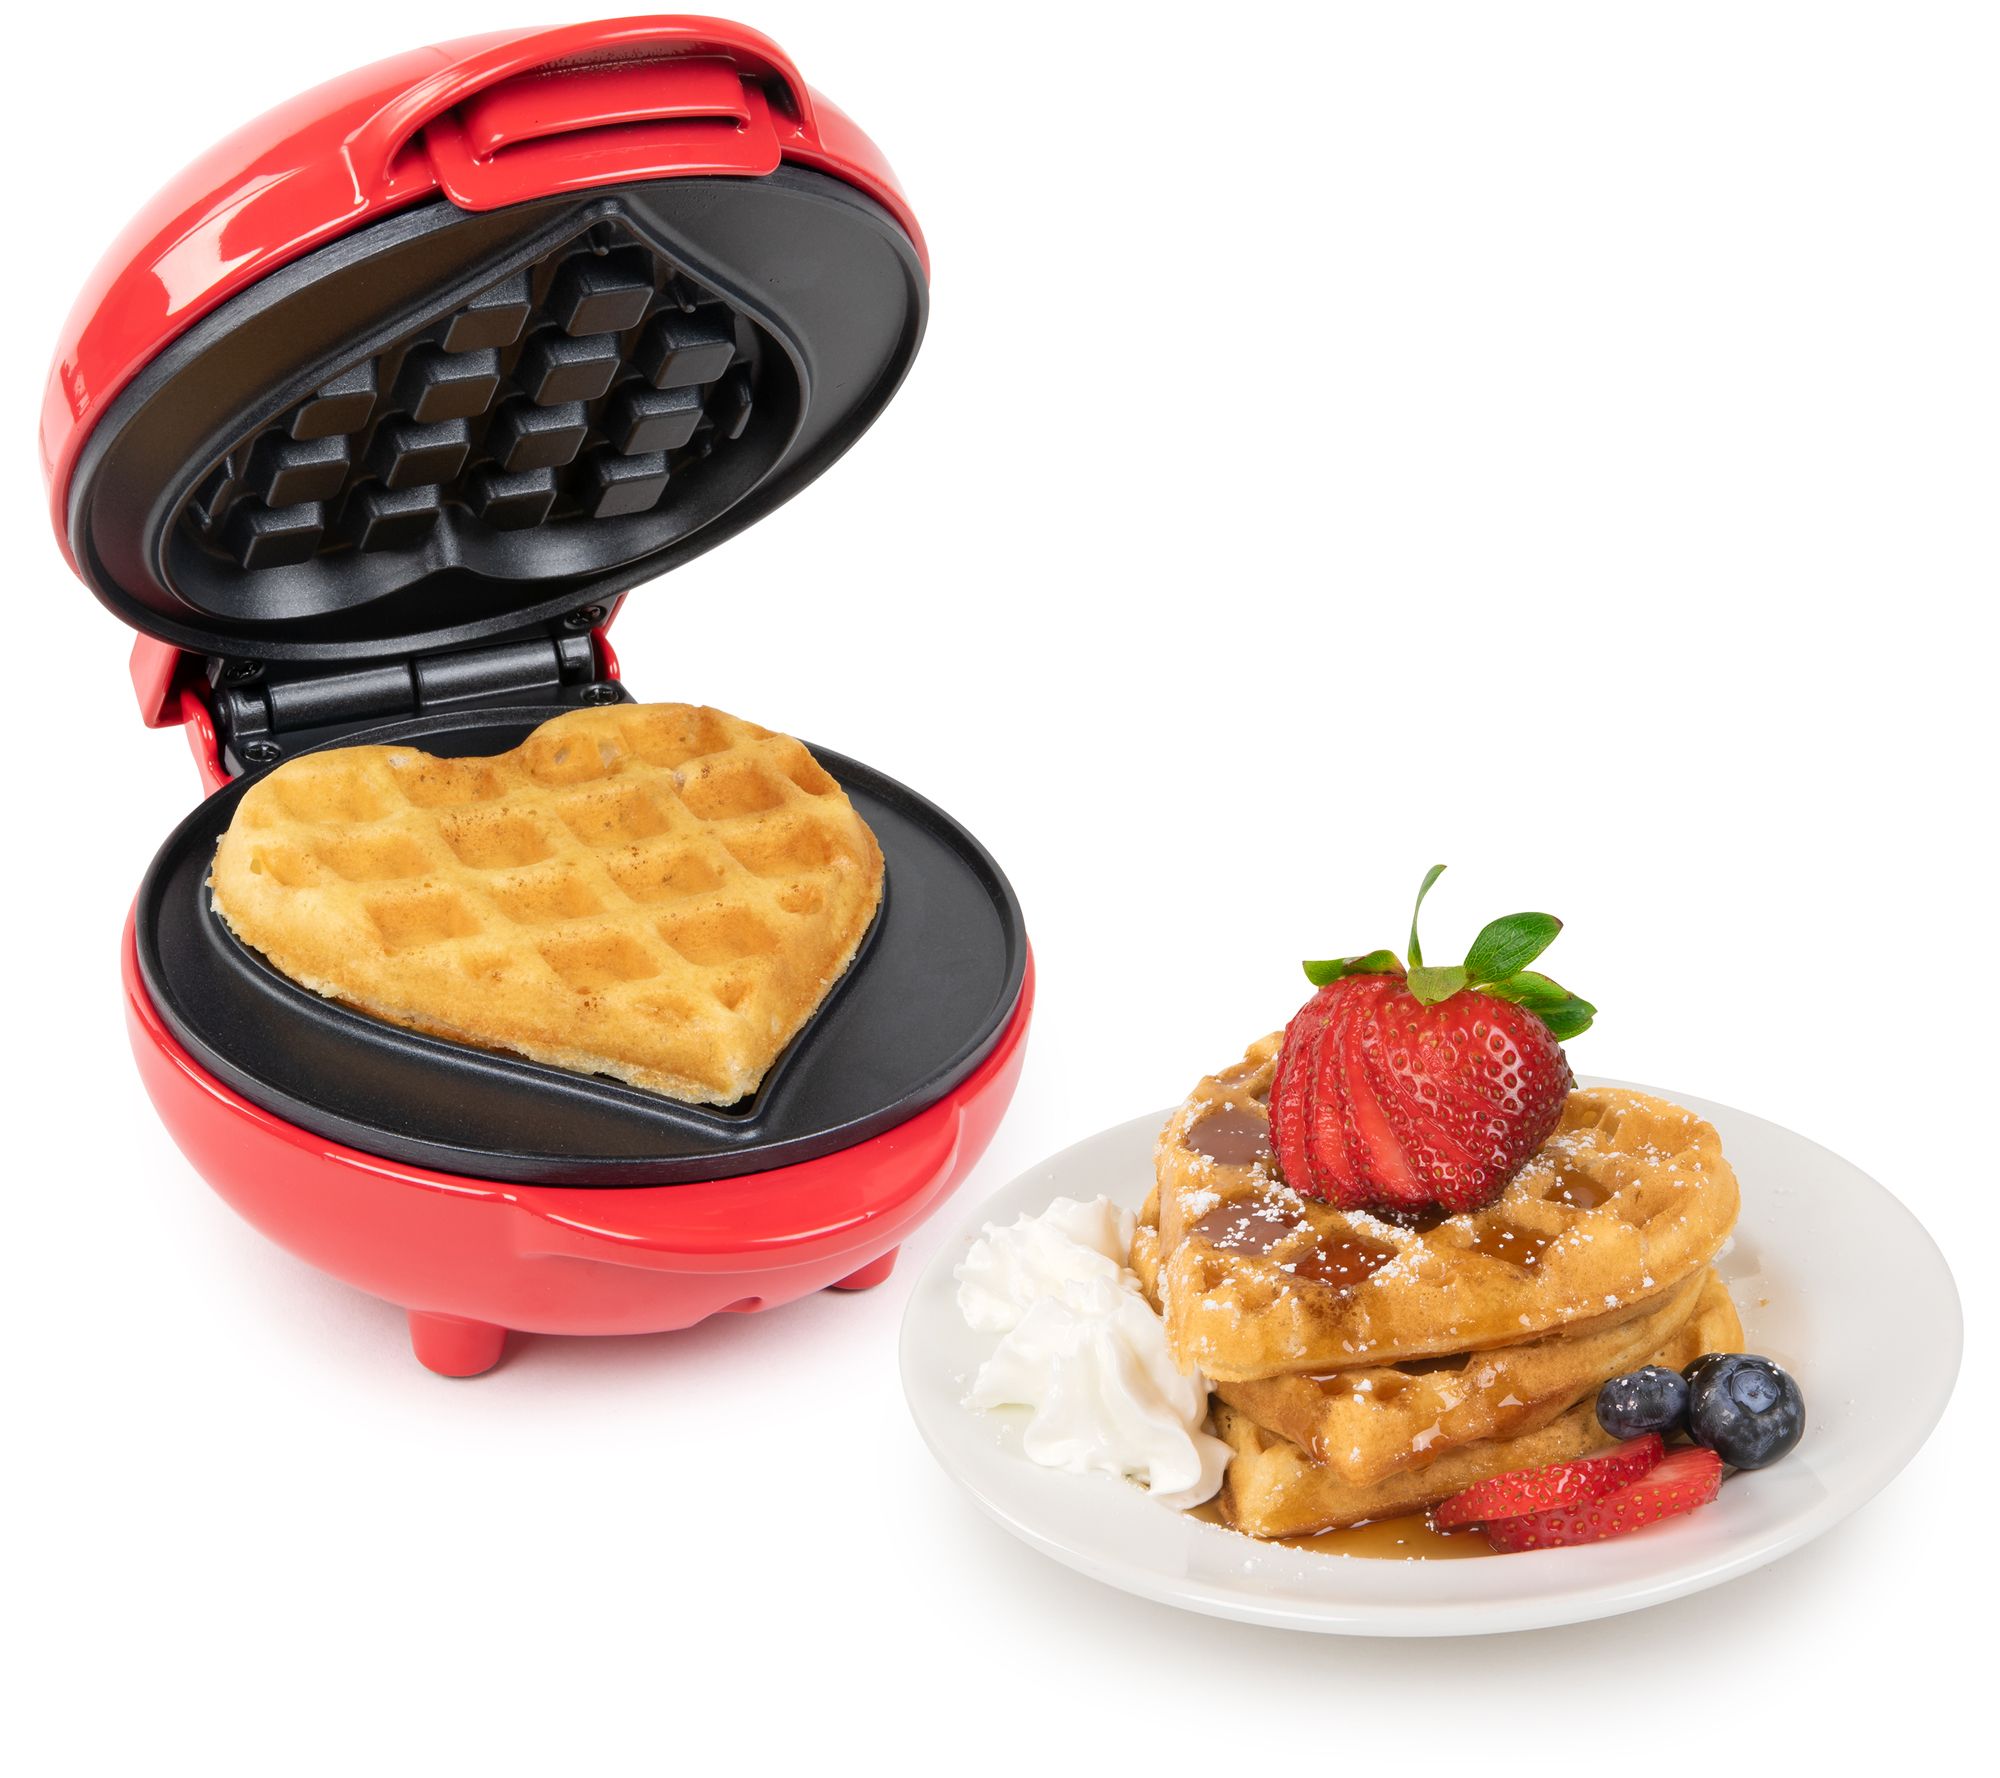 Nostalgia MyMini Personal Electric Waffle Maker Compact Size 5 inch Non-Stick for Kitchens, Campers and More